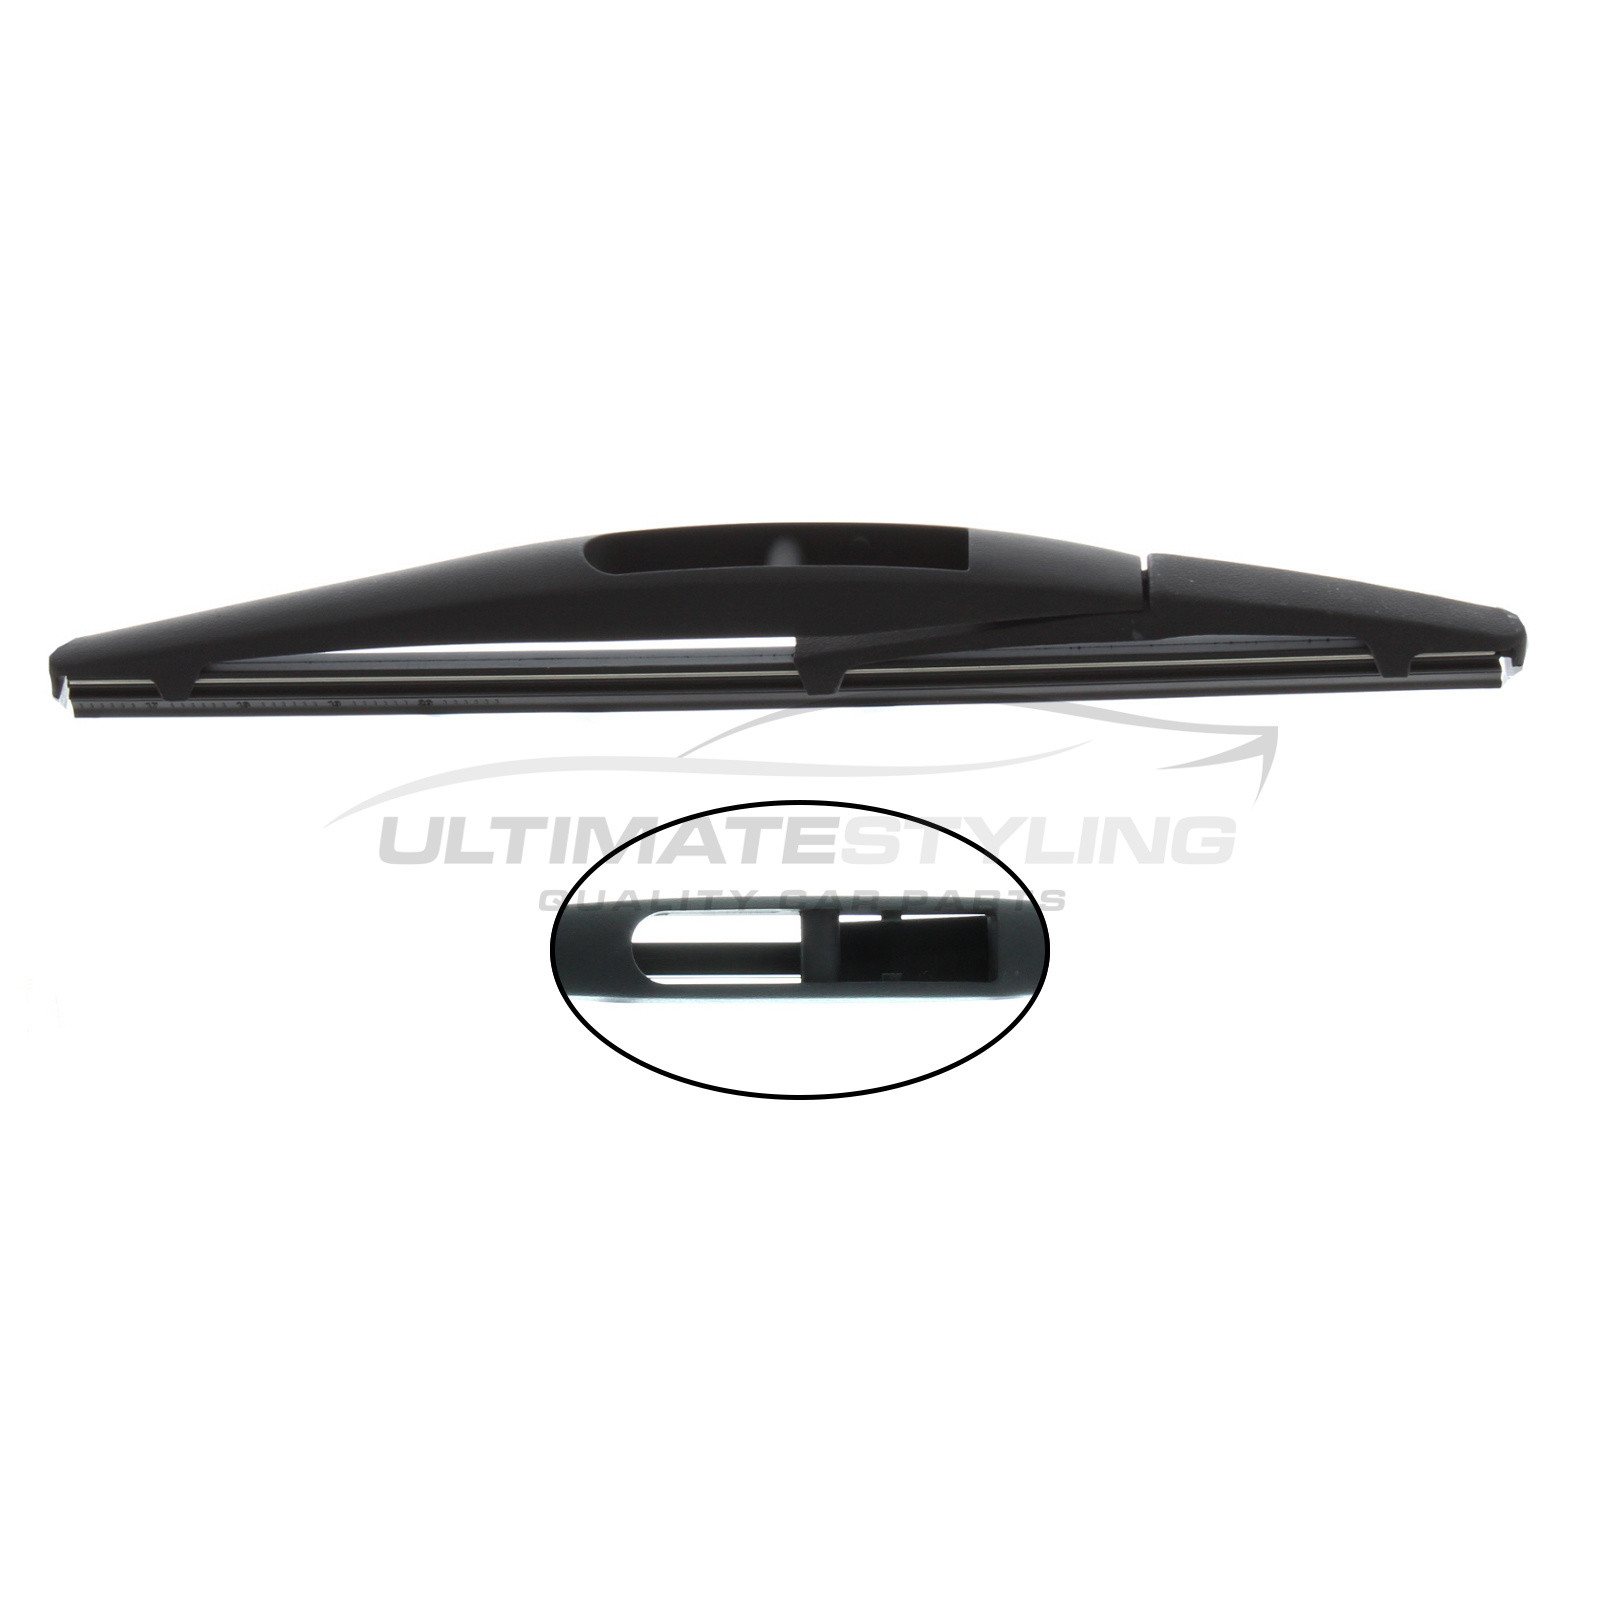 Drivers Side (RH) Rear <span style="color:red;"><strong>OR</strong></span> Passenger Side (LH) Rear Wiper Blade for Mini MINI